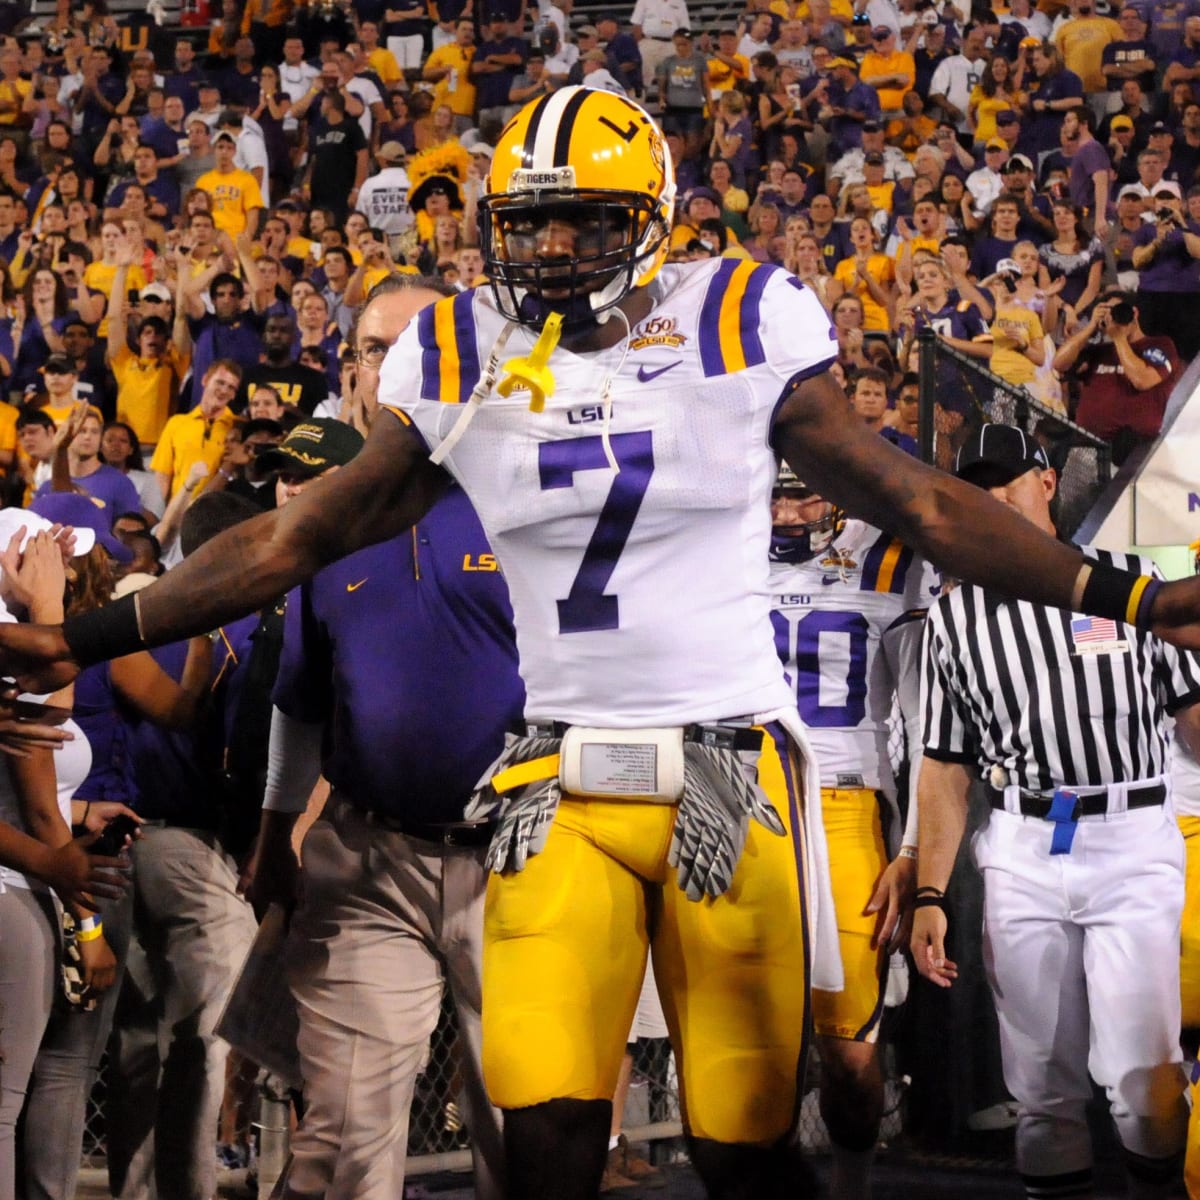 LSU Football: Ranking the Tigers players to wear No. 7